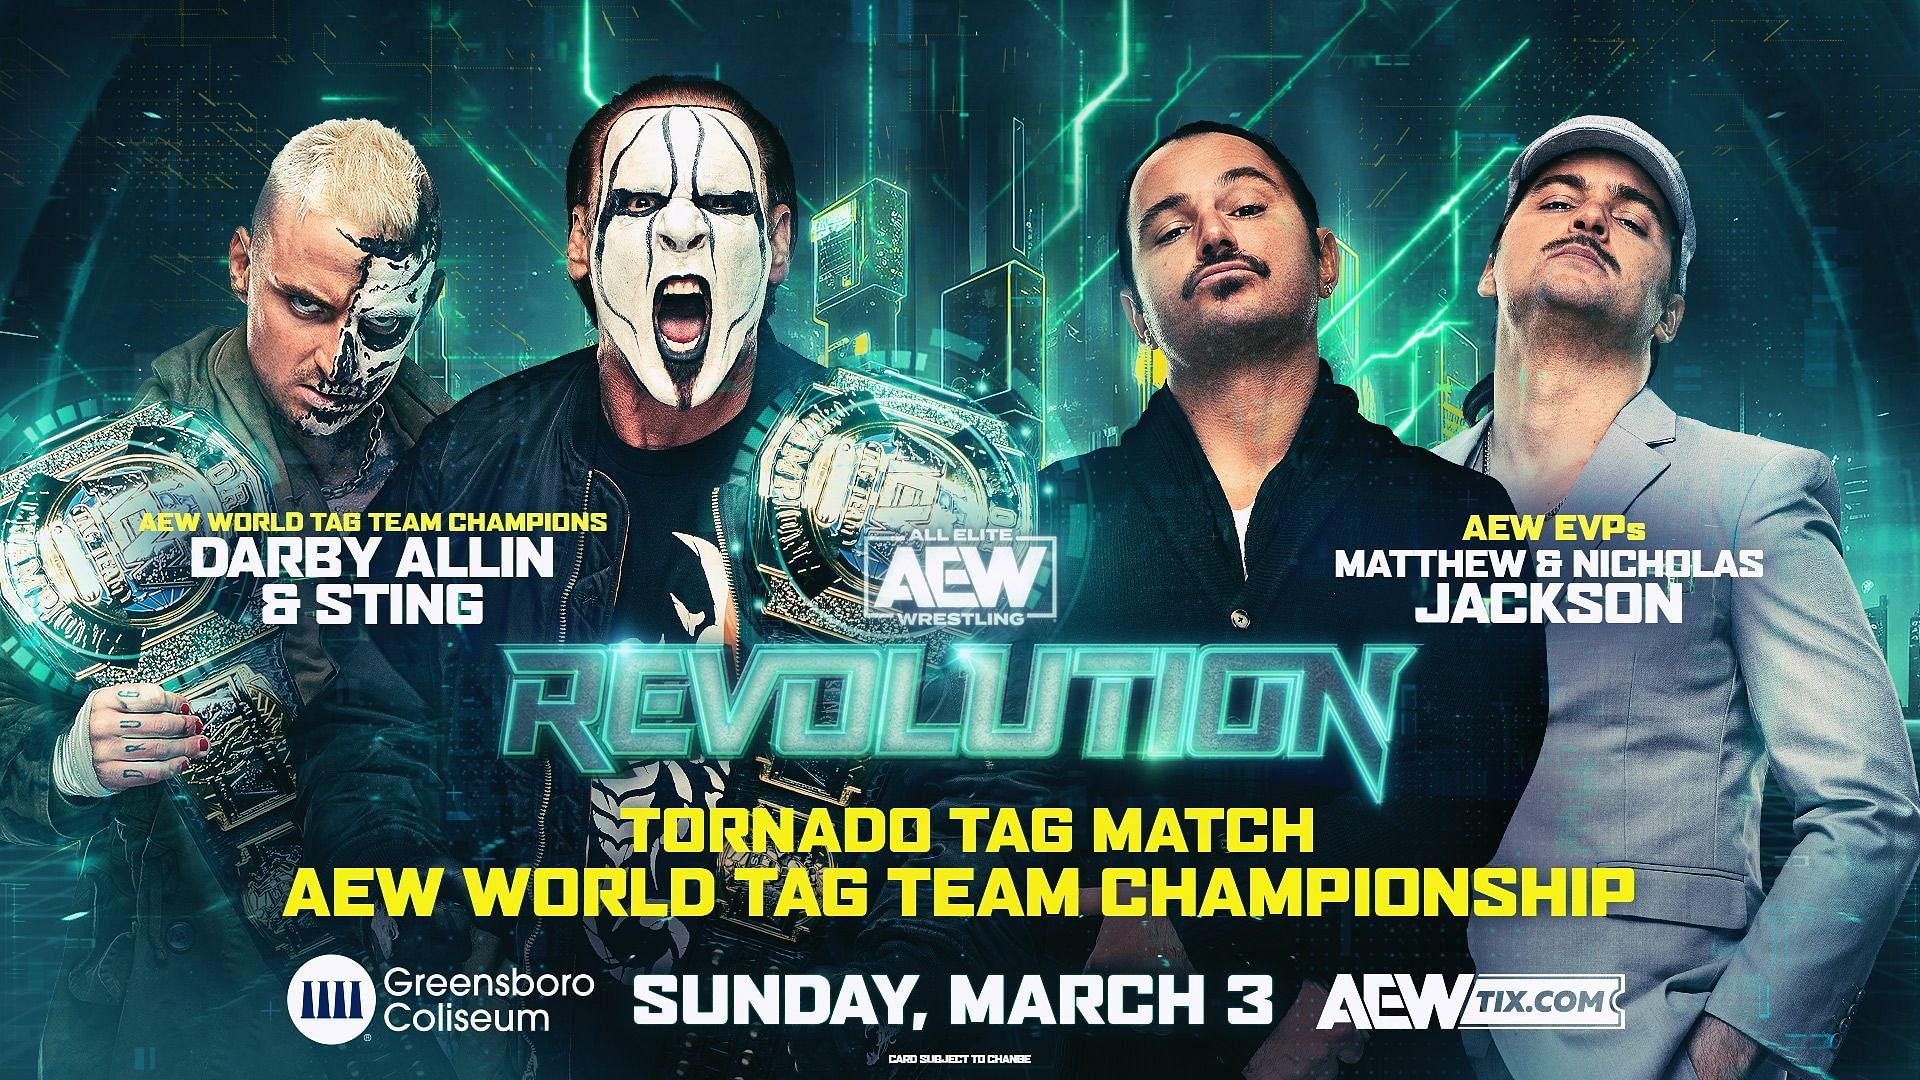 Sting and Darby Allin are set to face The Young Bucks at Revolution